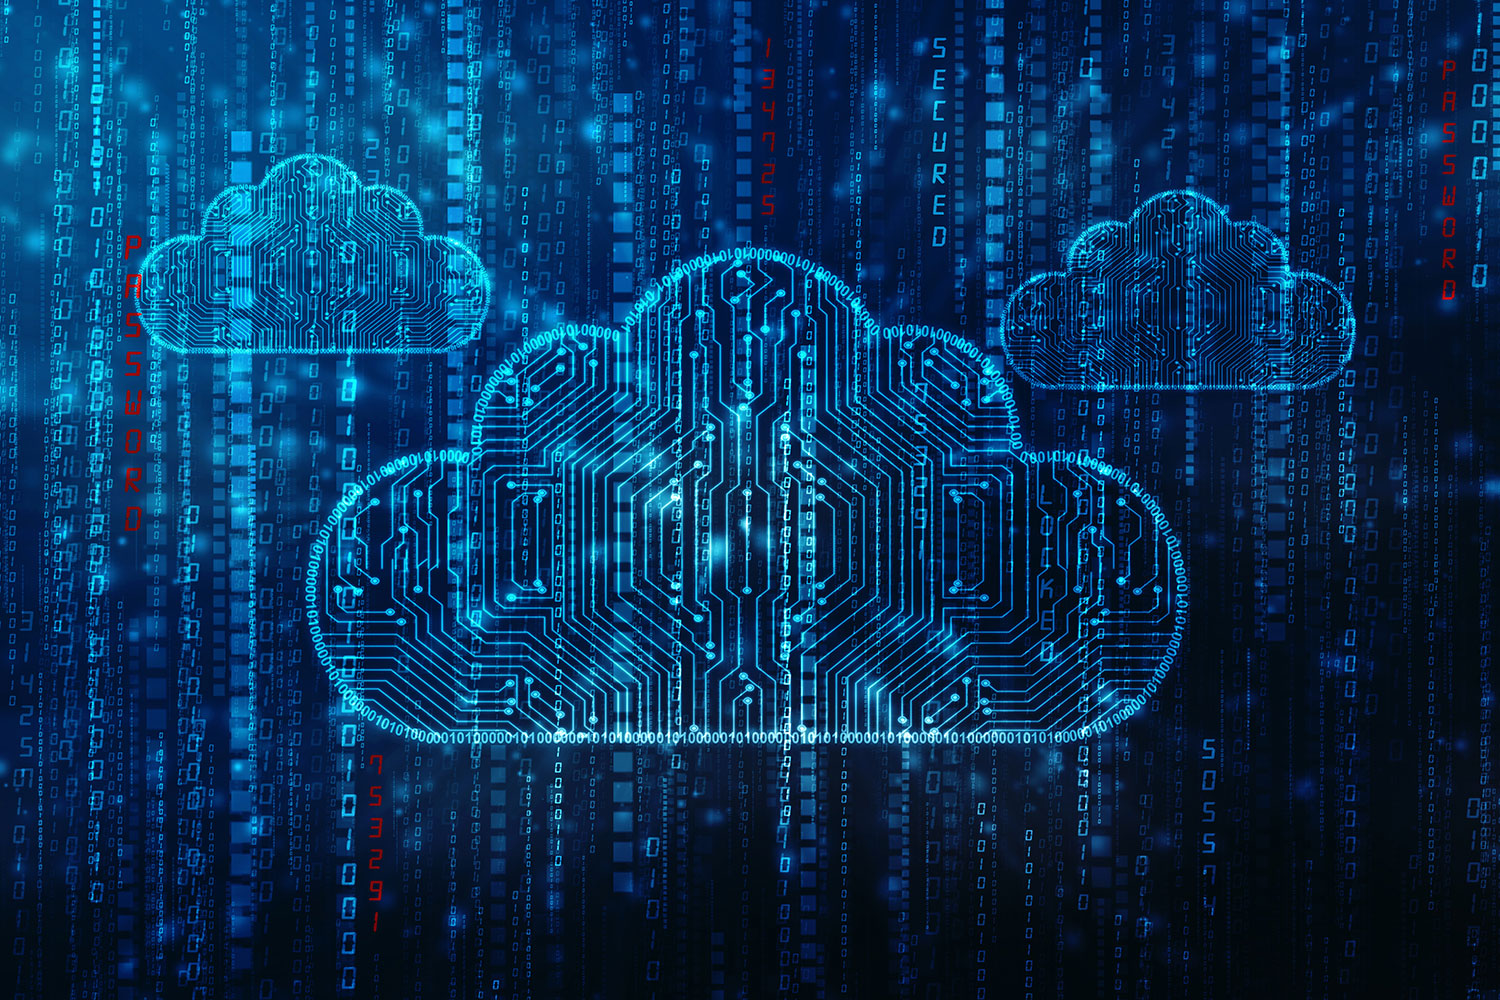 cloud computing background with code overlaid on image